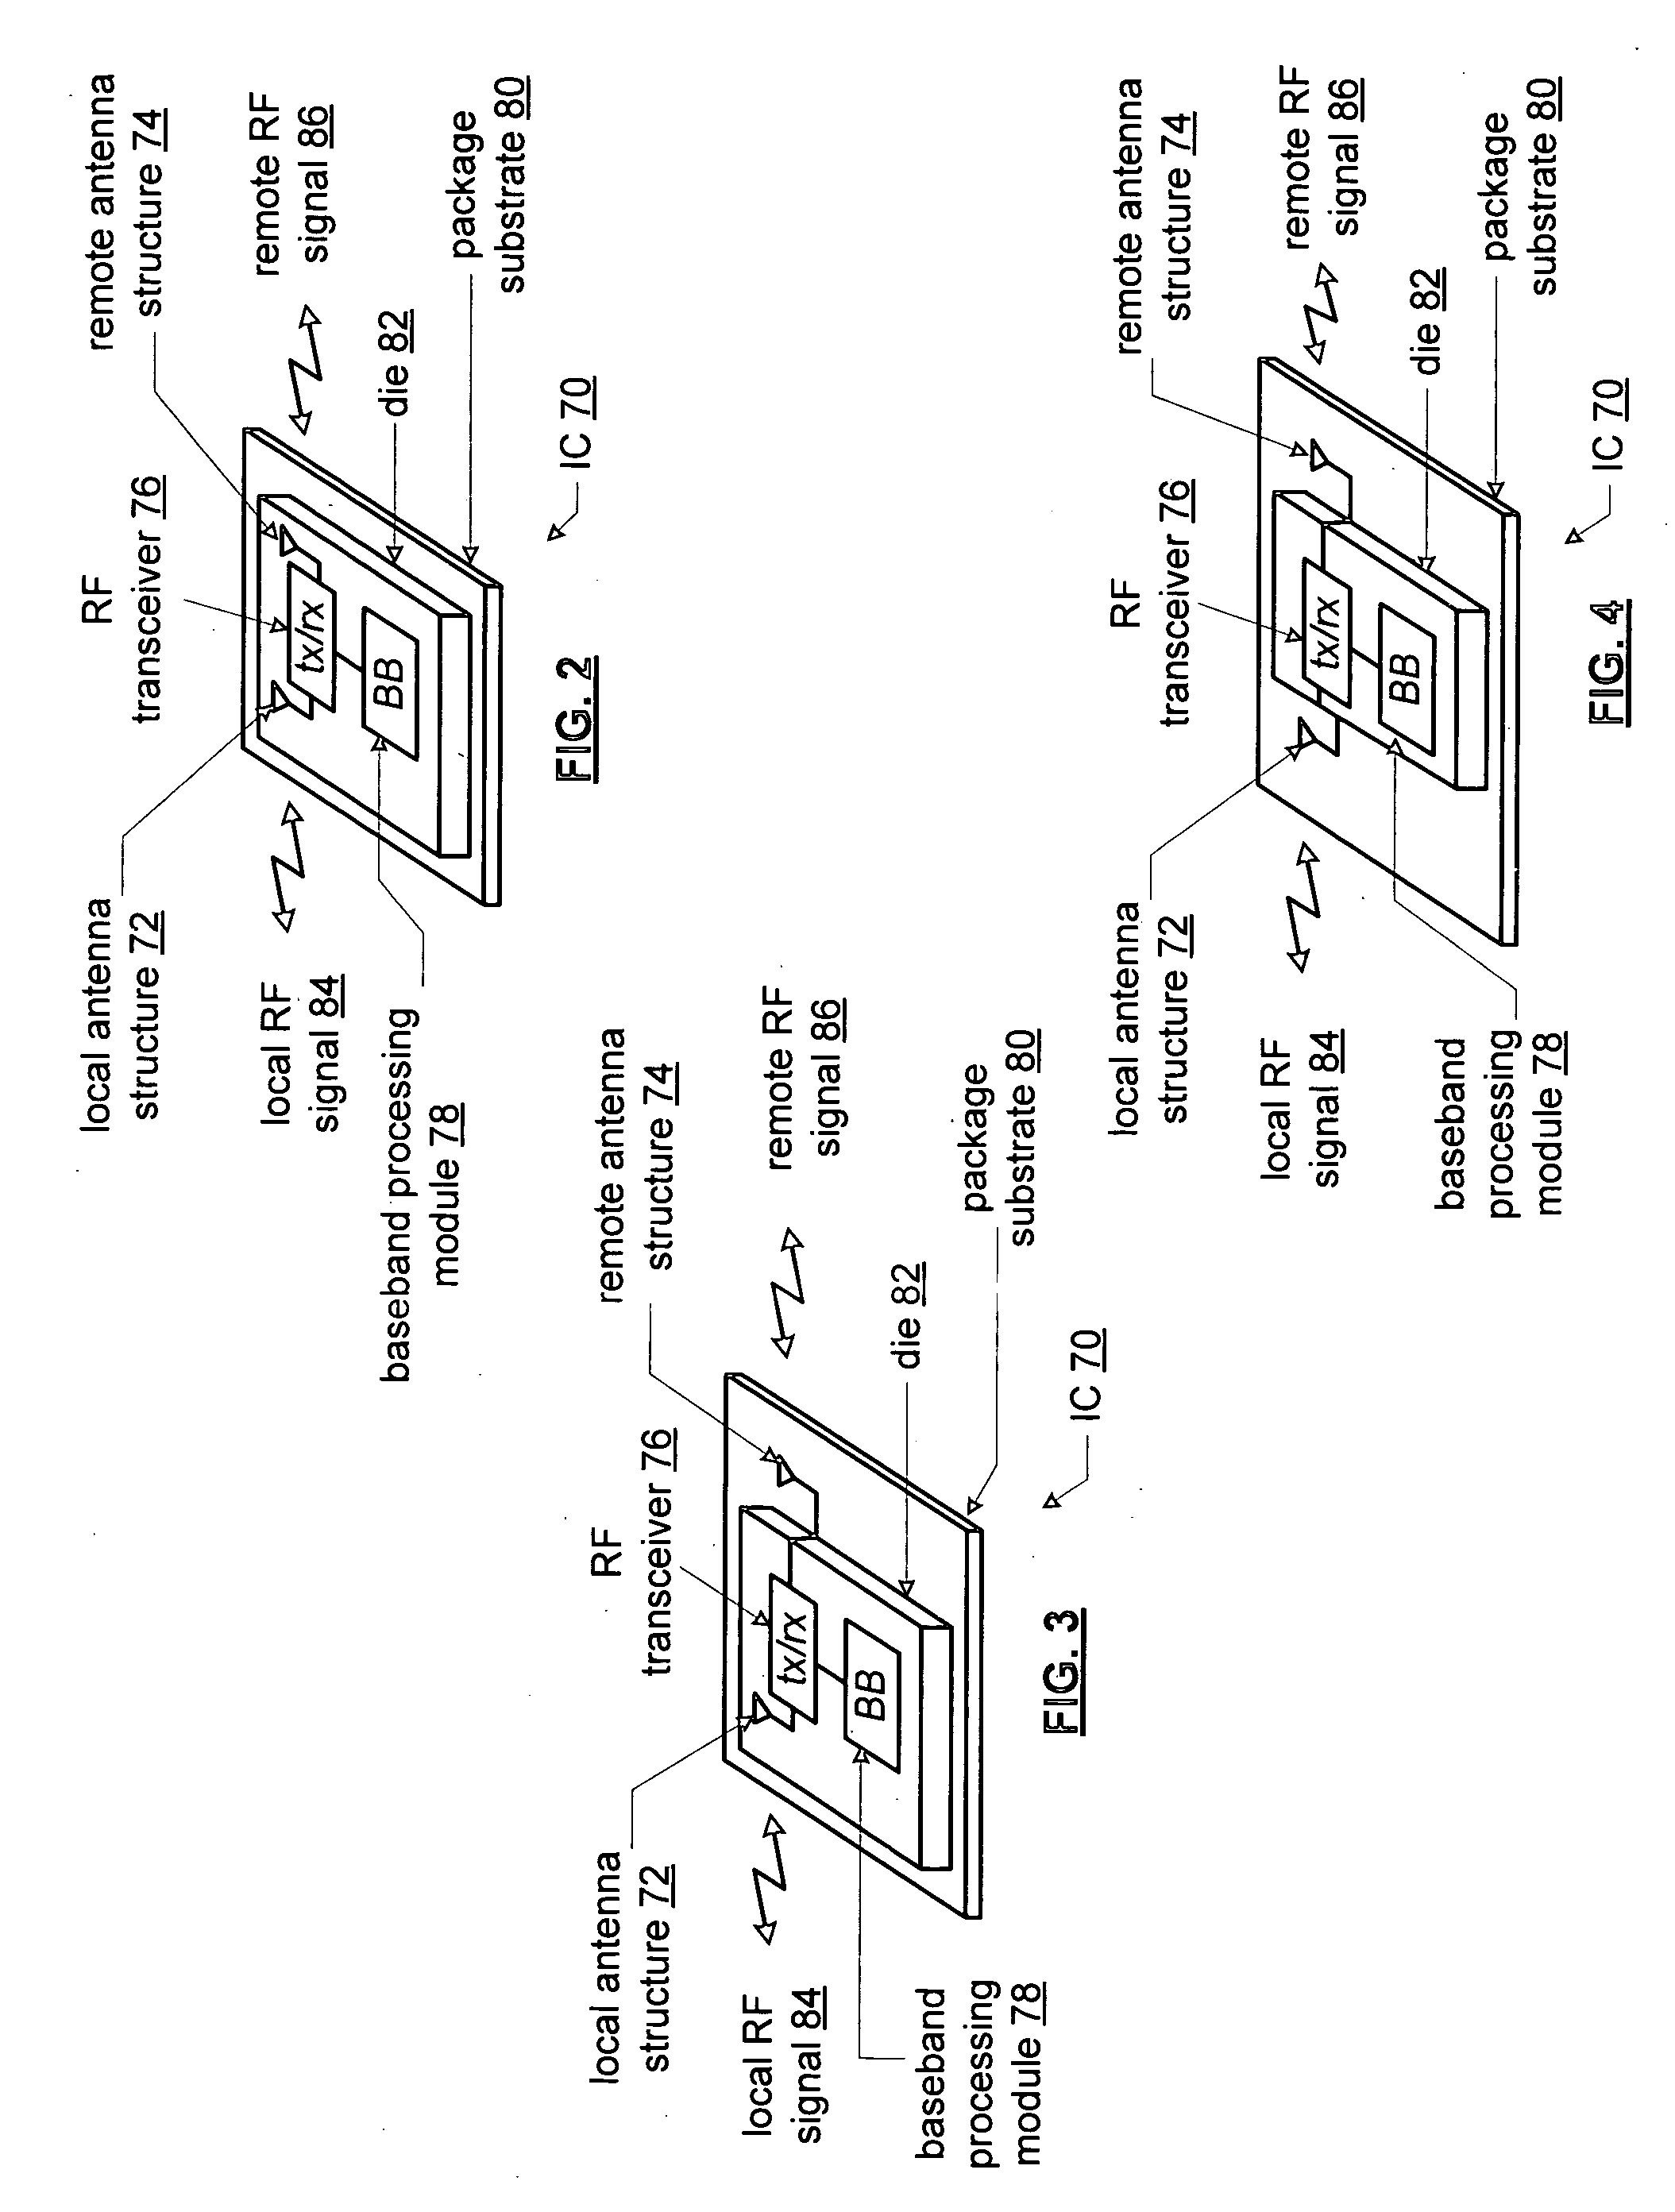 Adjustable integrated circuit antenna structure